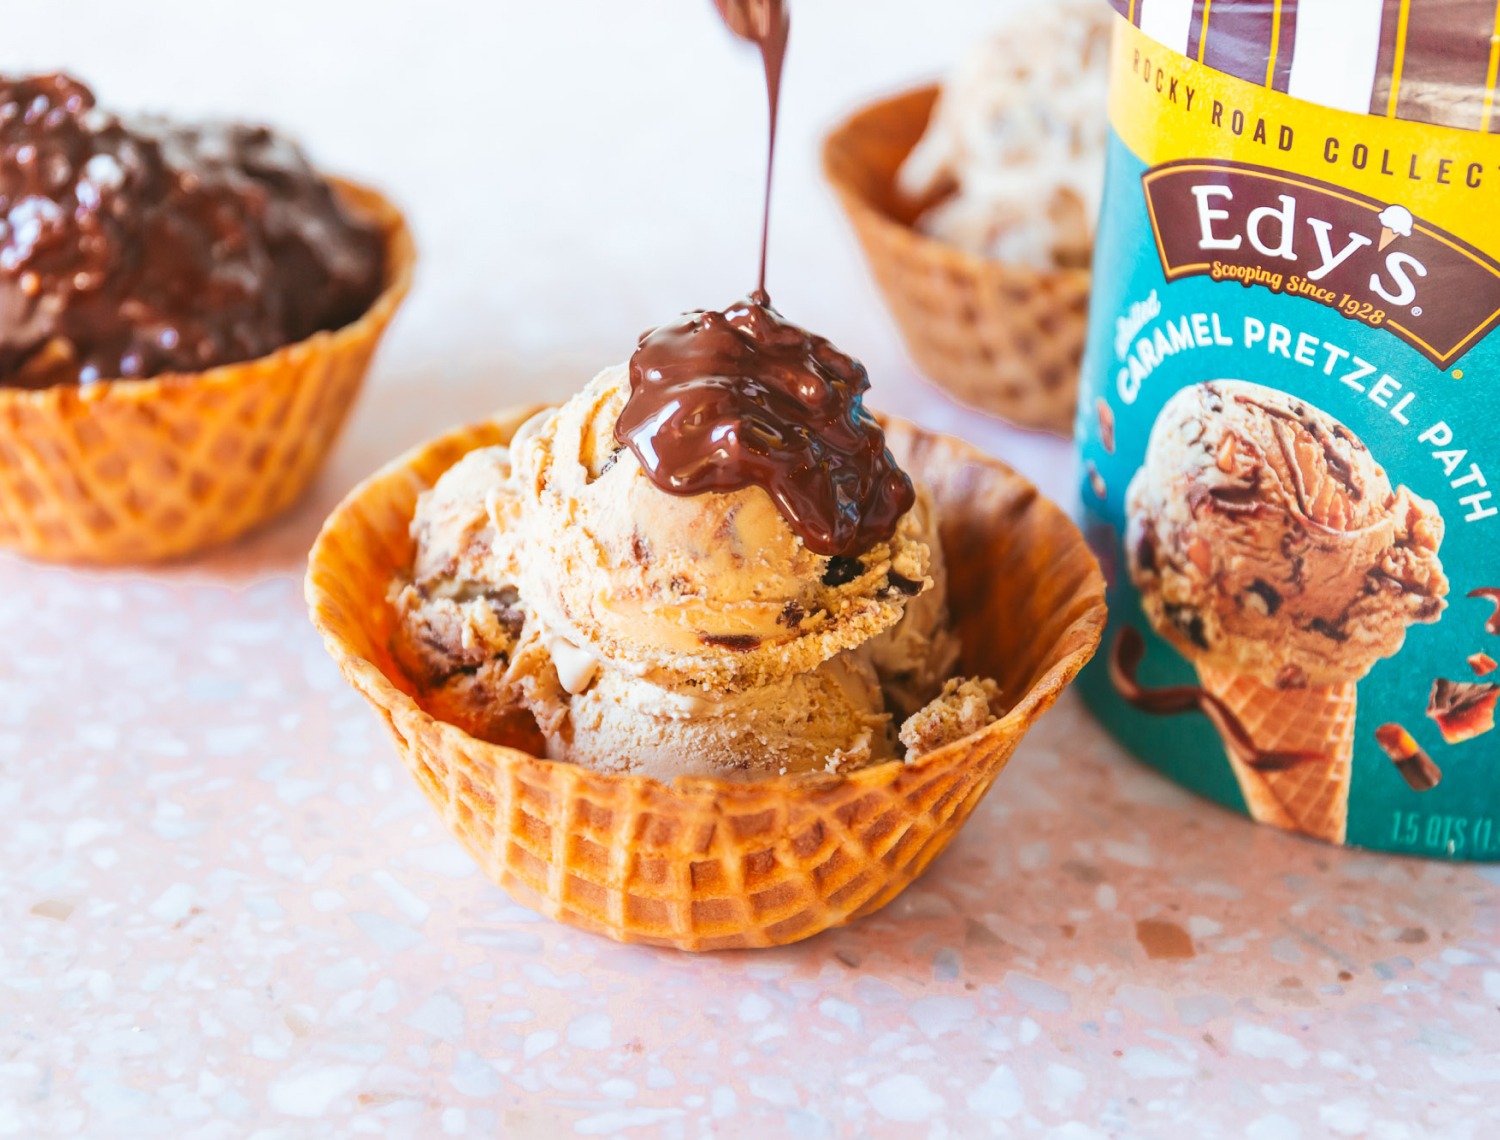 Edy's salted caramel pretzel path ice cream in a waffle cone bowl with chocolate